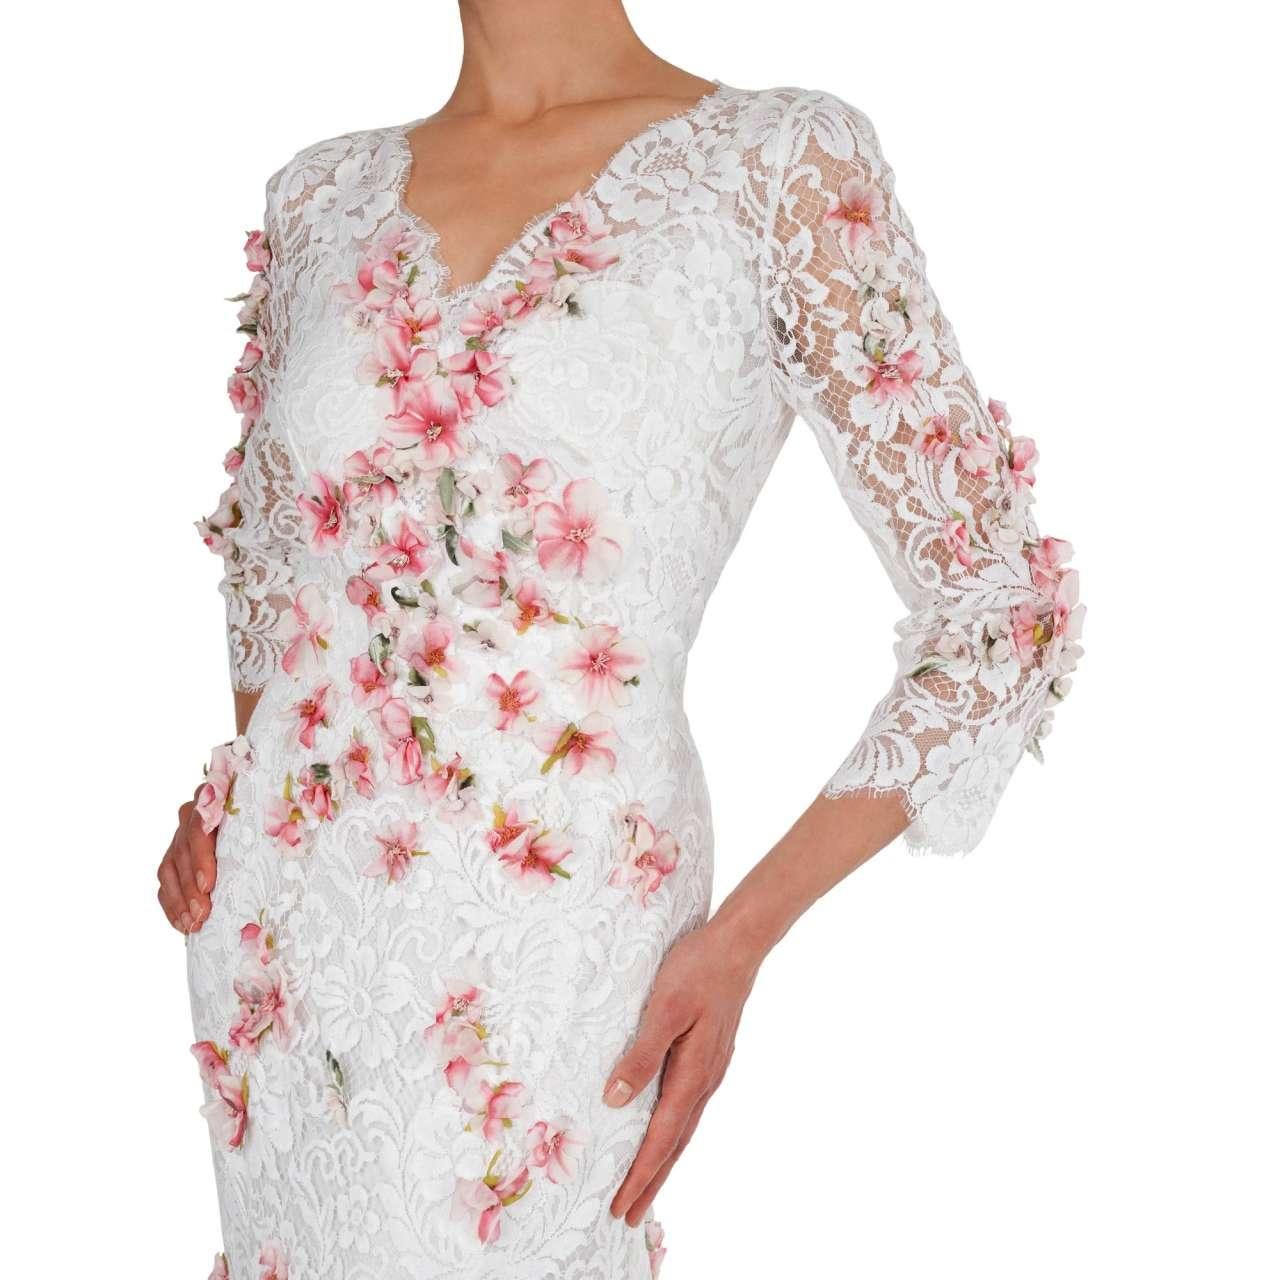 - Long wedding dress with train, floral lace, silk underdress and cherry flower embroidery applications in pink and white by DOLCE & GABBANA - MADE IN ITALY - New with Tag - Former RRP: EUR 14.900 - Concealed back zip closure - Long with train -